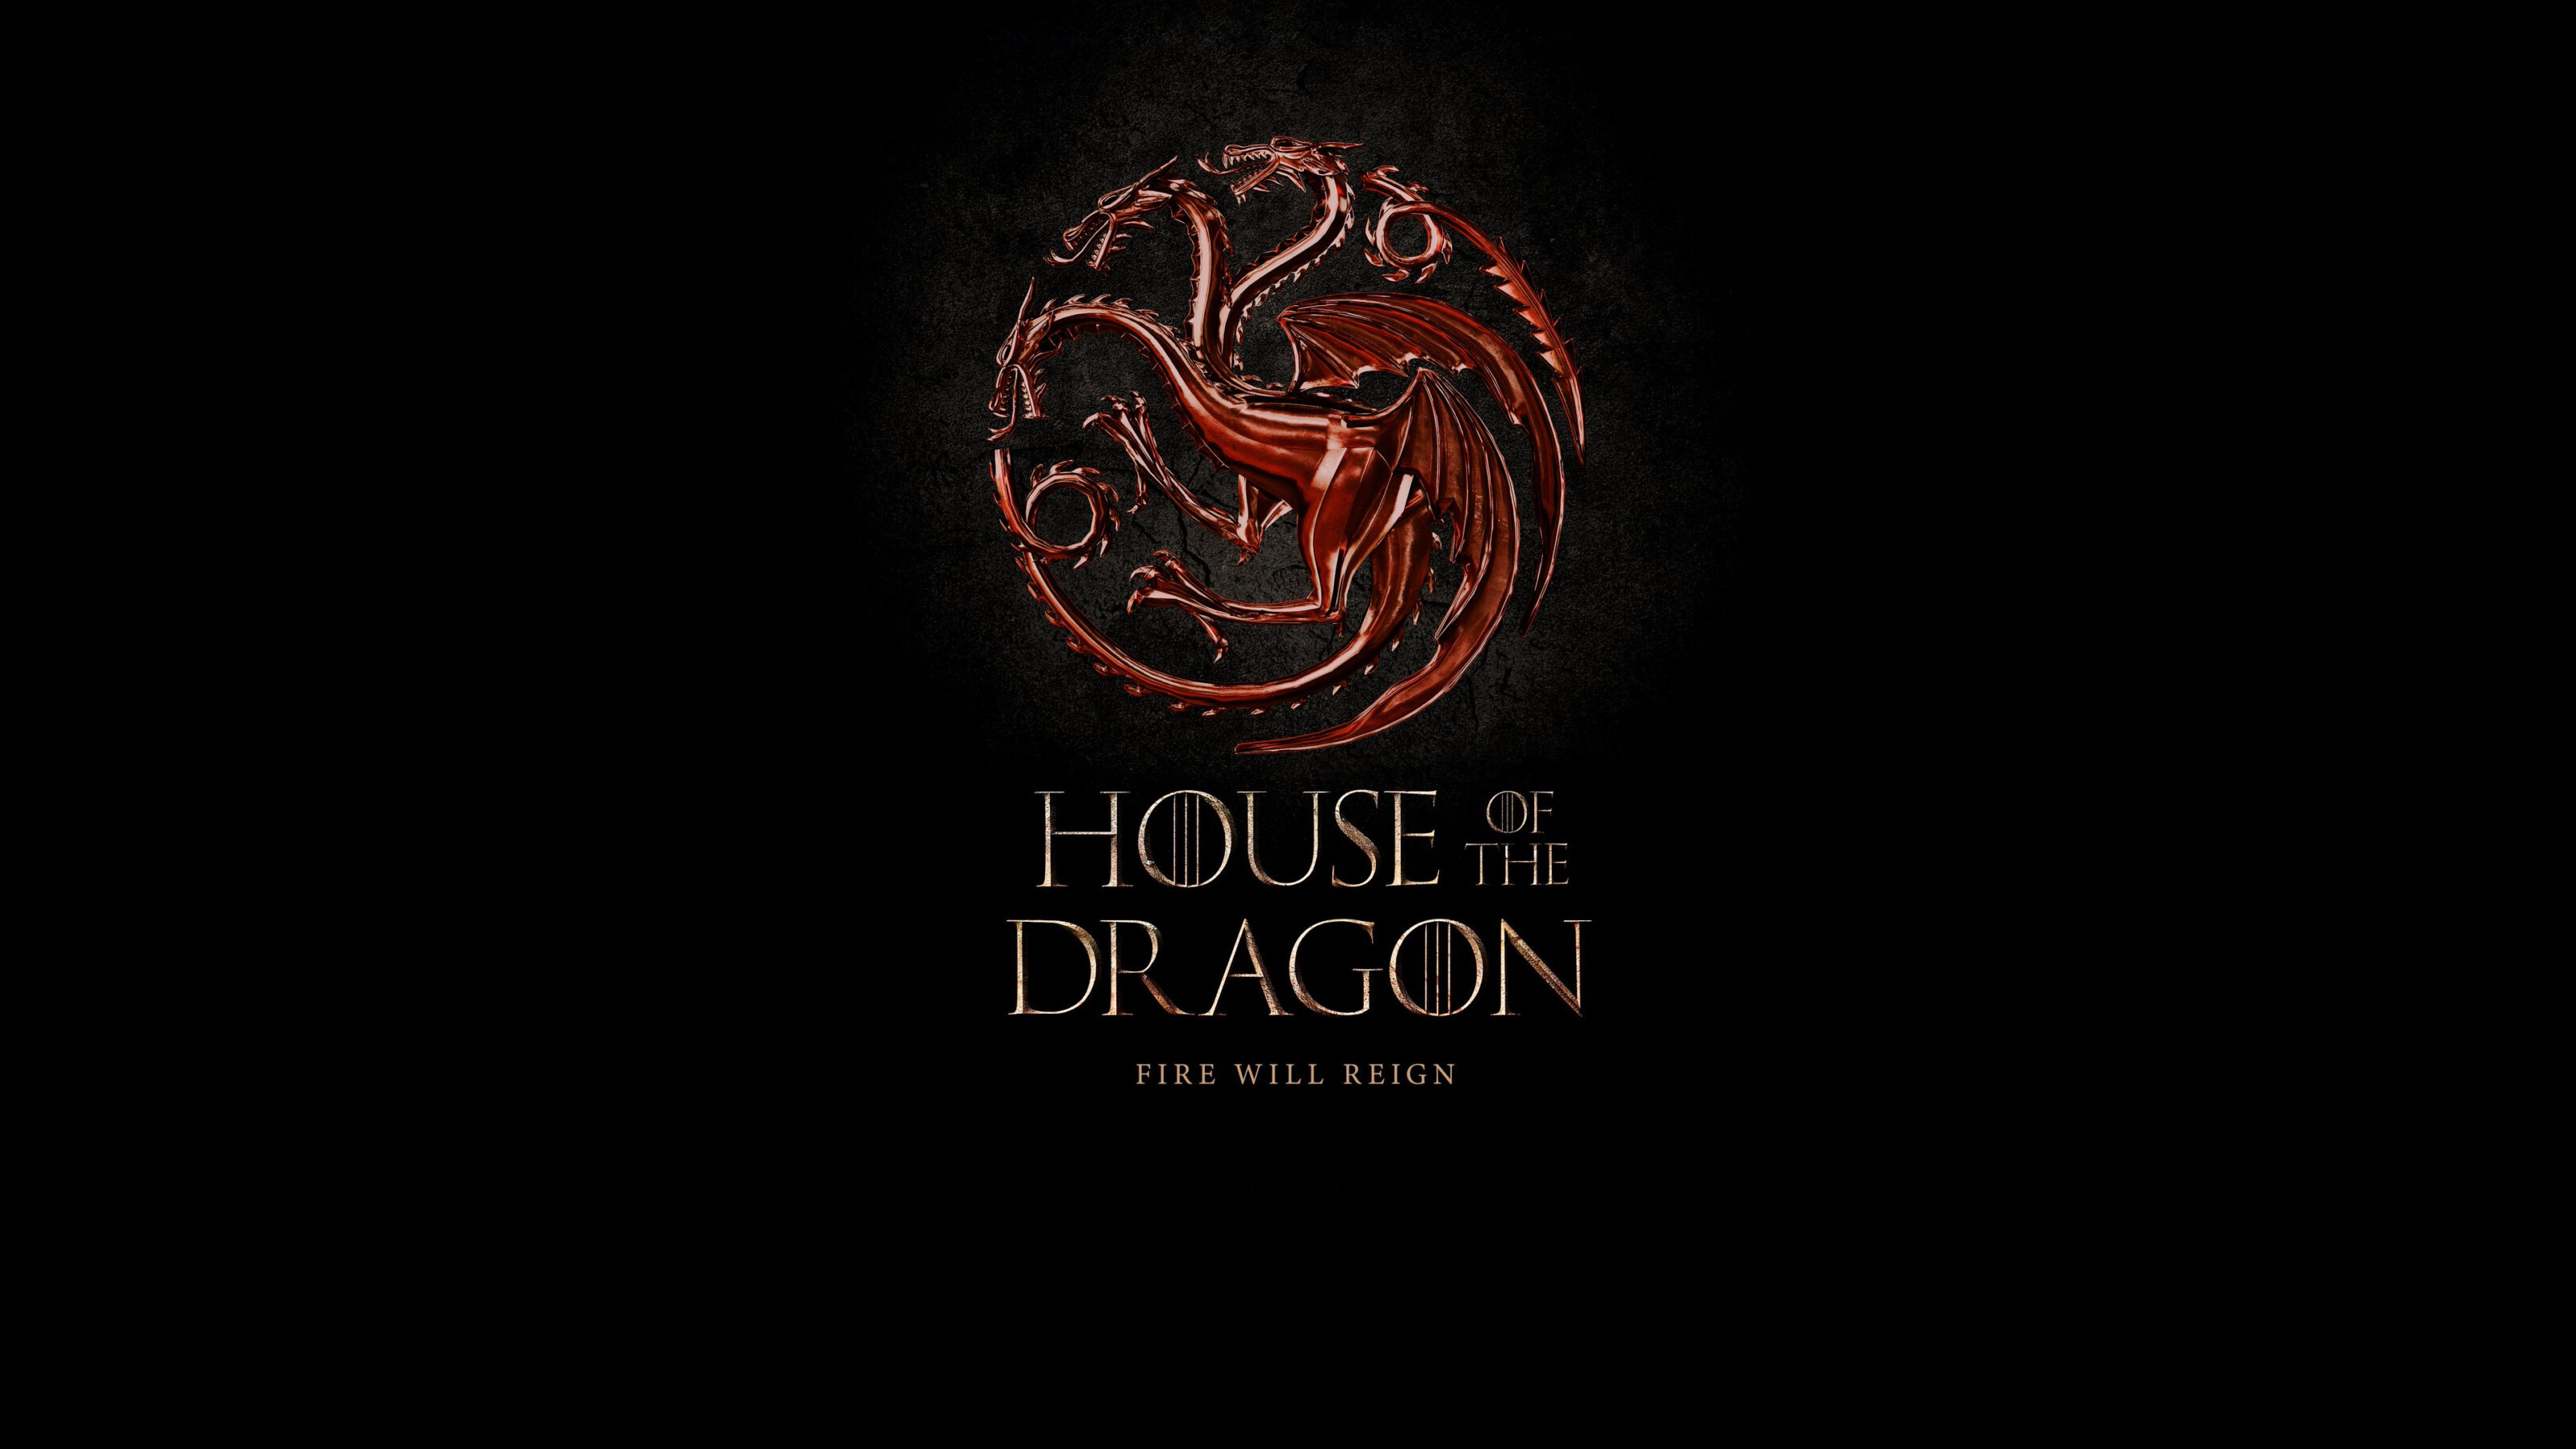 House of the dragon wallpaper 001